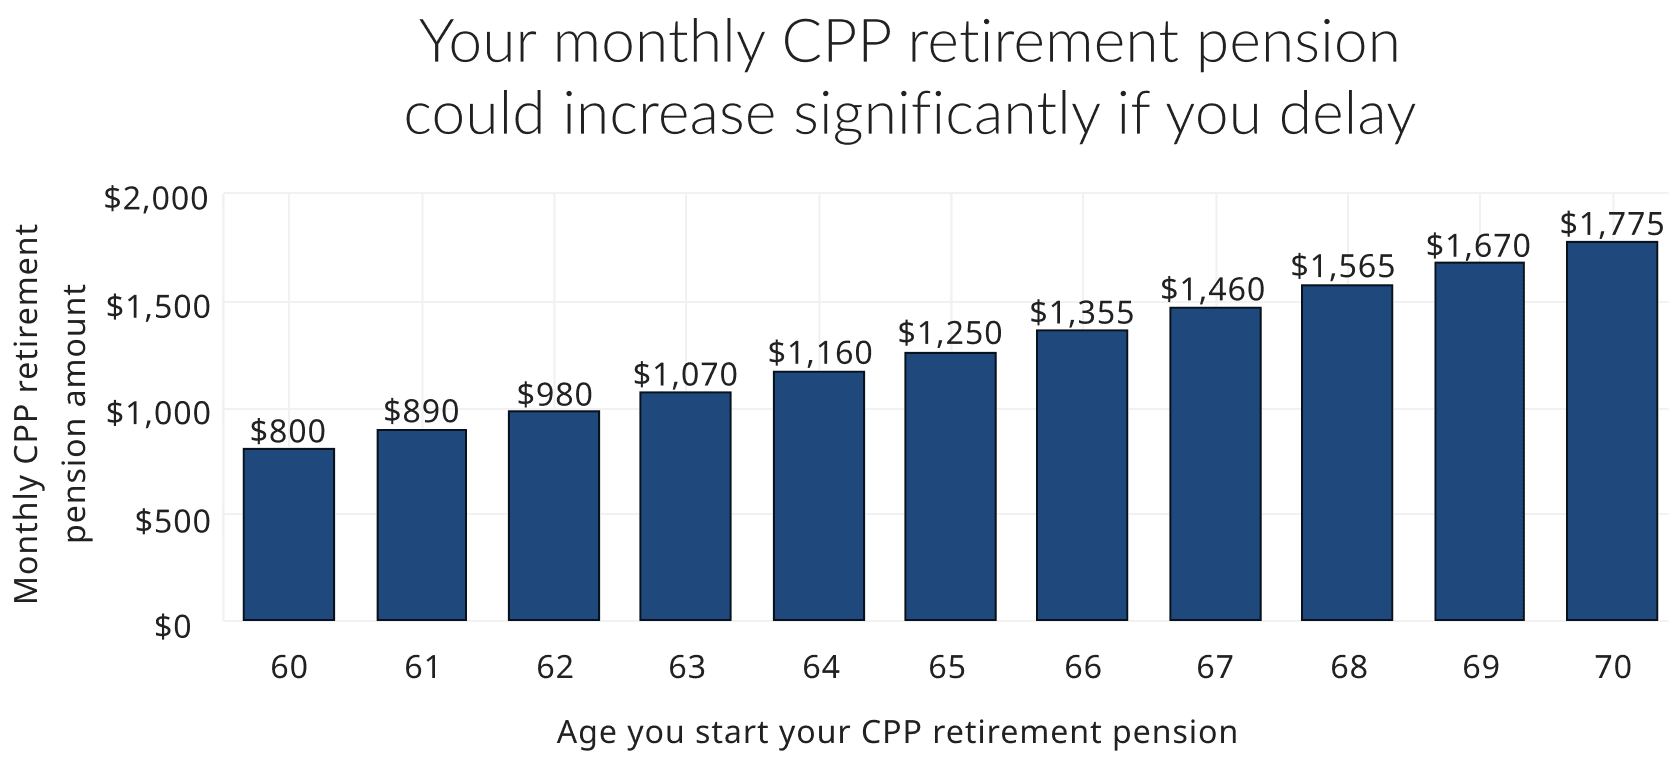 The chart shows changes in monthly amounts for your CPP retirement pension based on what age you start. It shows that the longer you wait to start your pension, the more money you'll collect. Your CPP retirement pension could more than double if started at age 70, instead of 60. The chart is an illustration of the pension increase with age and uses an illustrative pension amount.